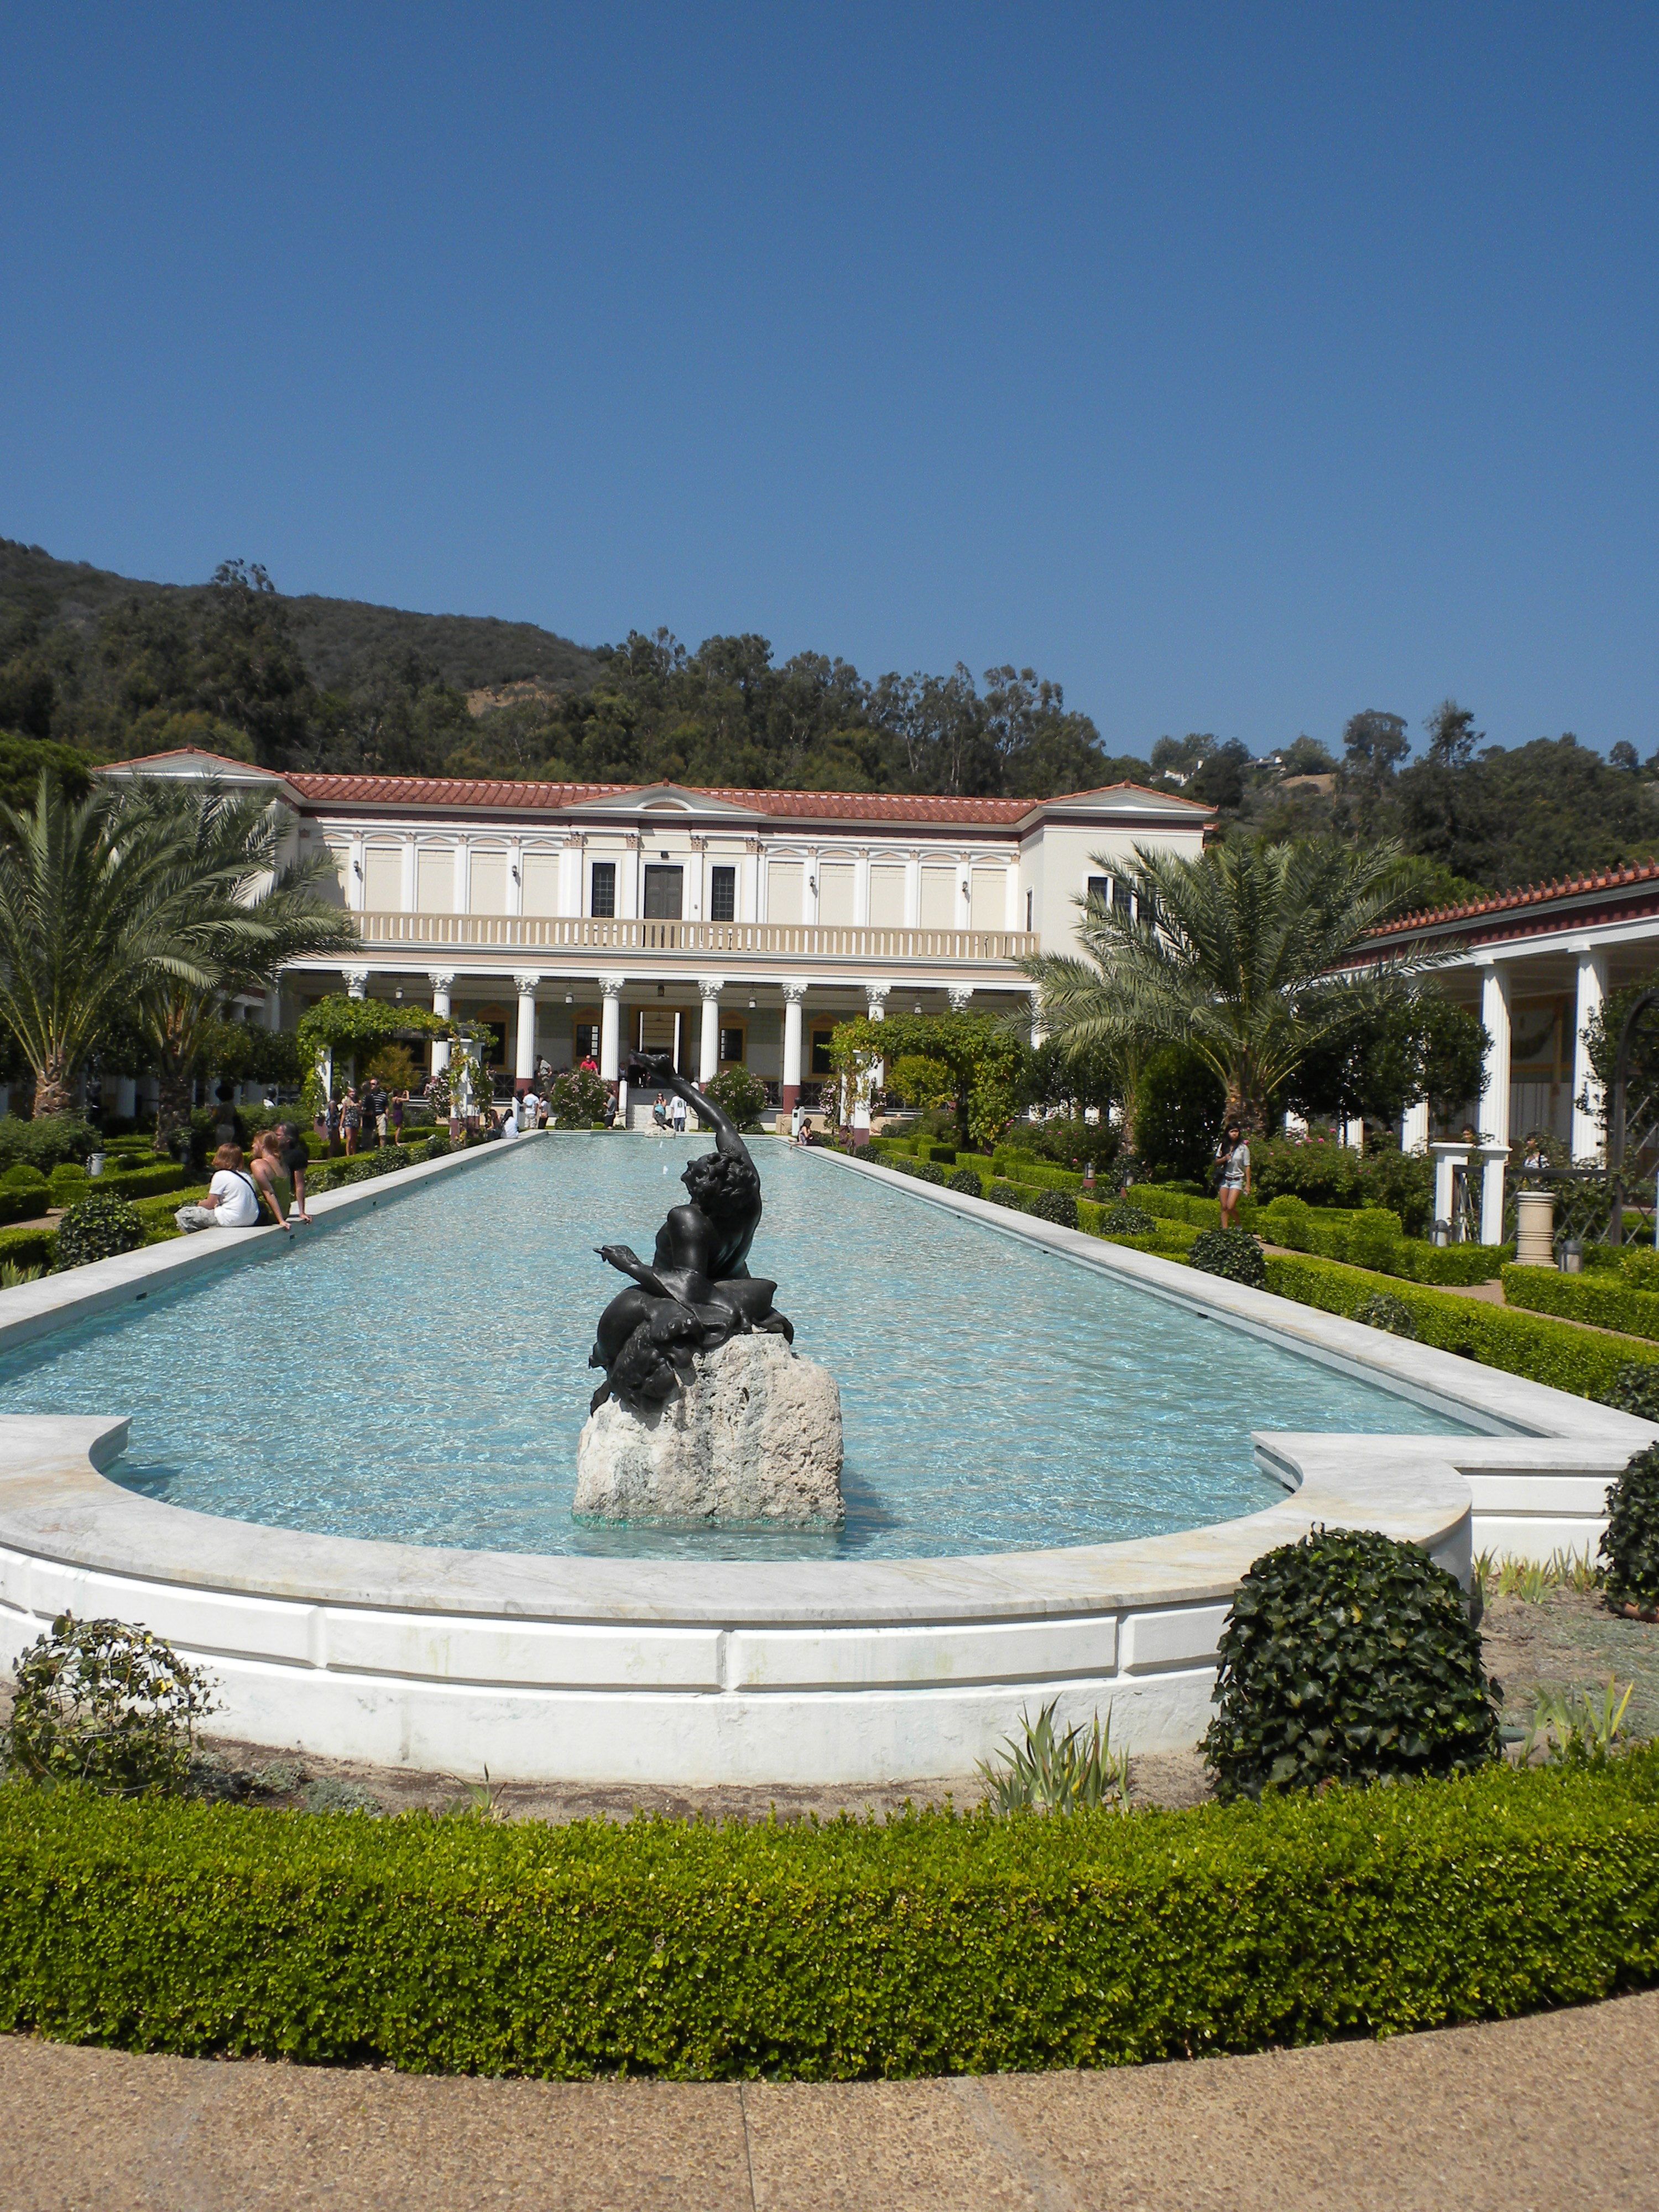 How the Roman One Percent (1%) lived: pool at Getty Villa in Malibu, CA near our HQ. #water #statue #tree #trees #mountain #hill #blue Photo credit: (C) Acculation